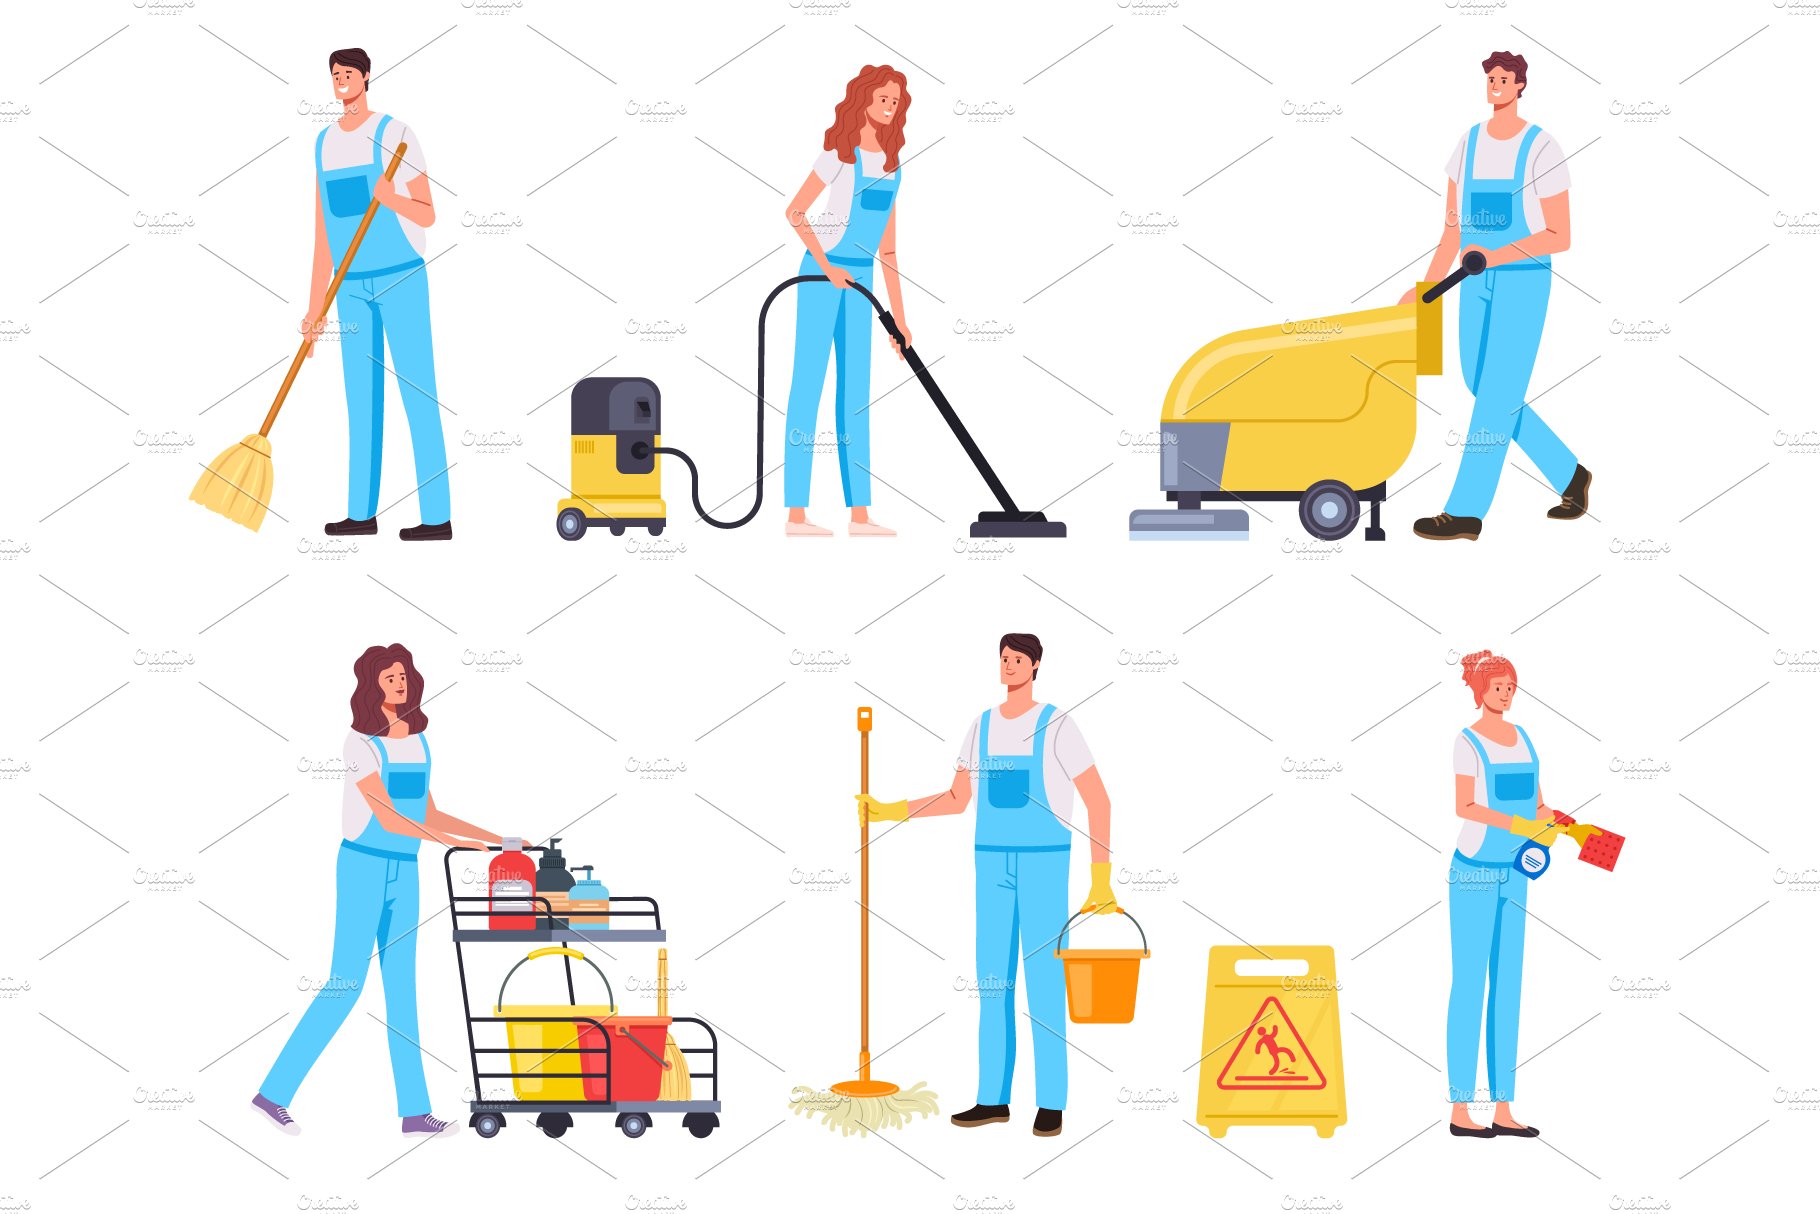 Cleaning people team cover image.